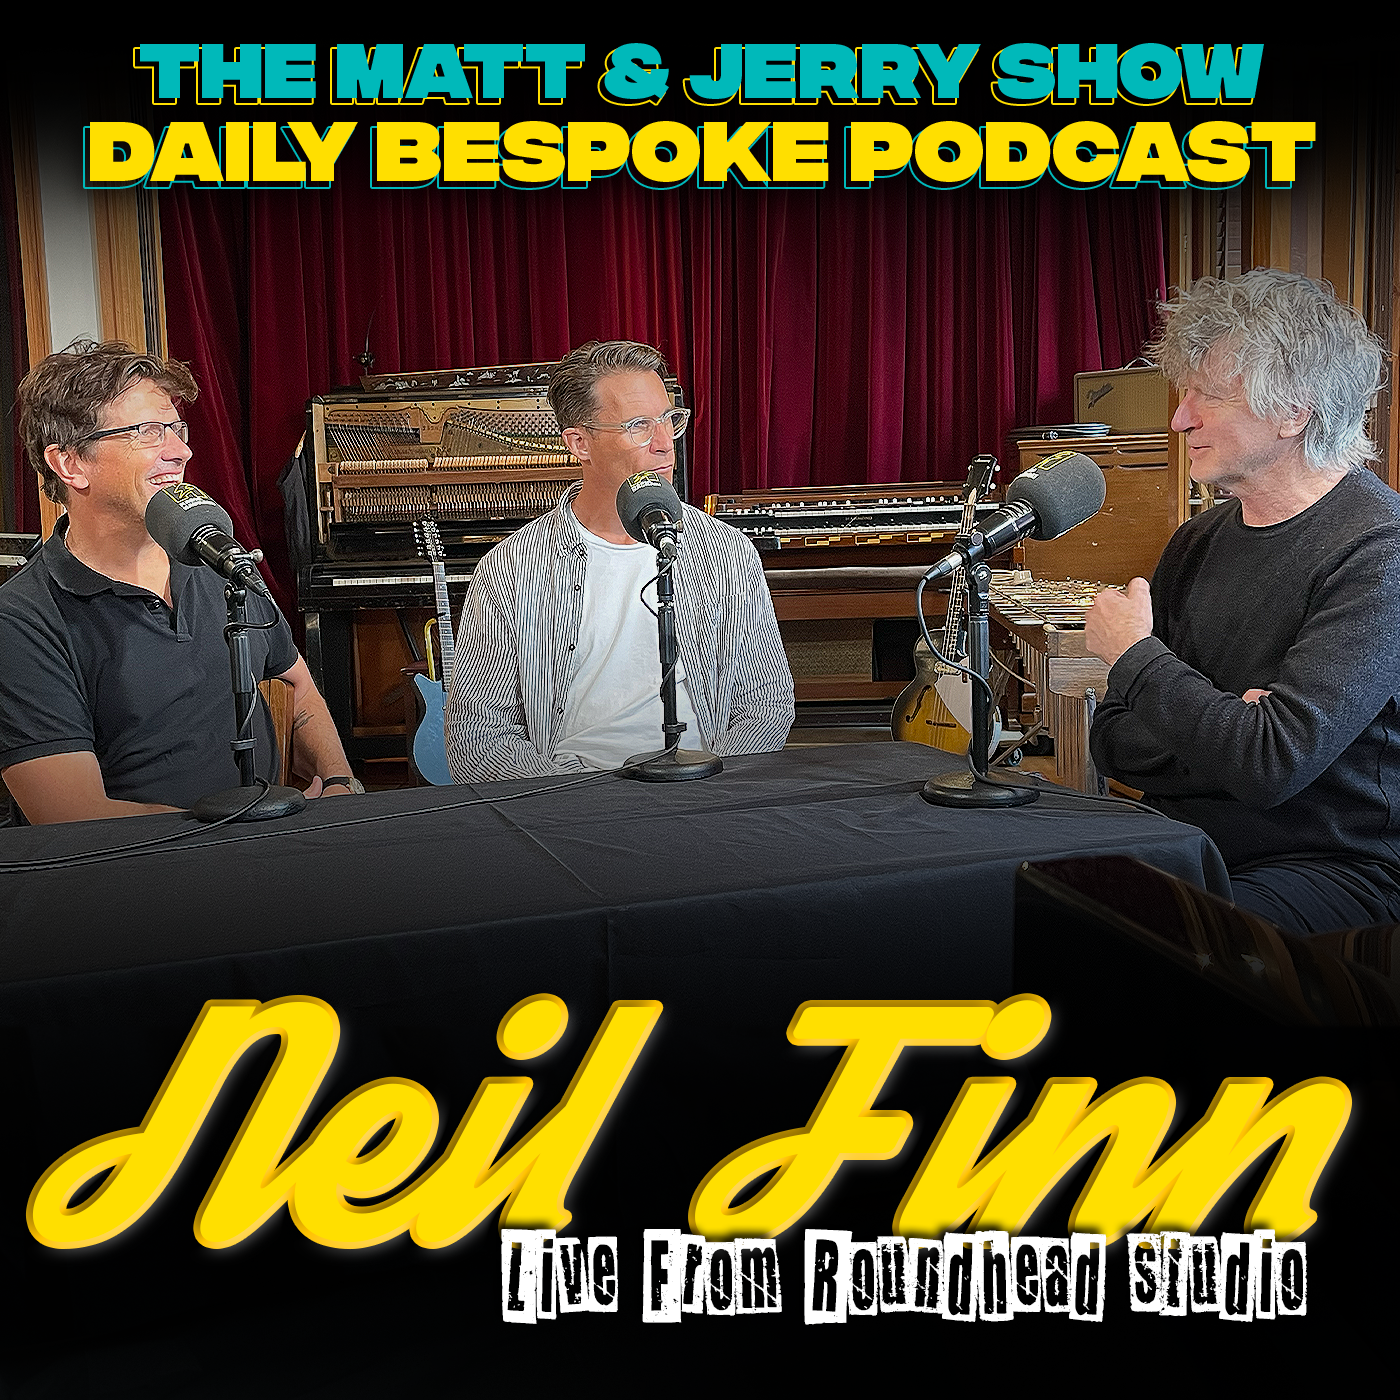 Neil Finn (Live From Roundhead Studios) - The Daily Bespoke May 13